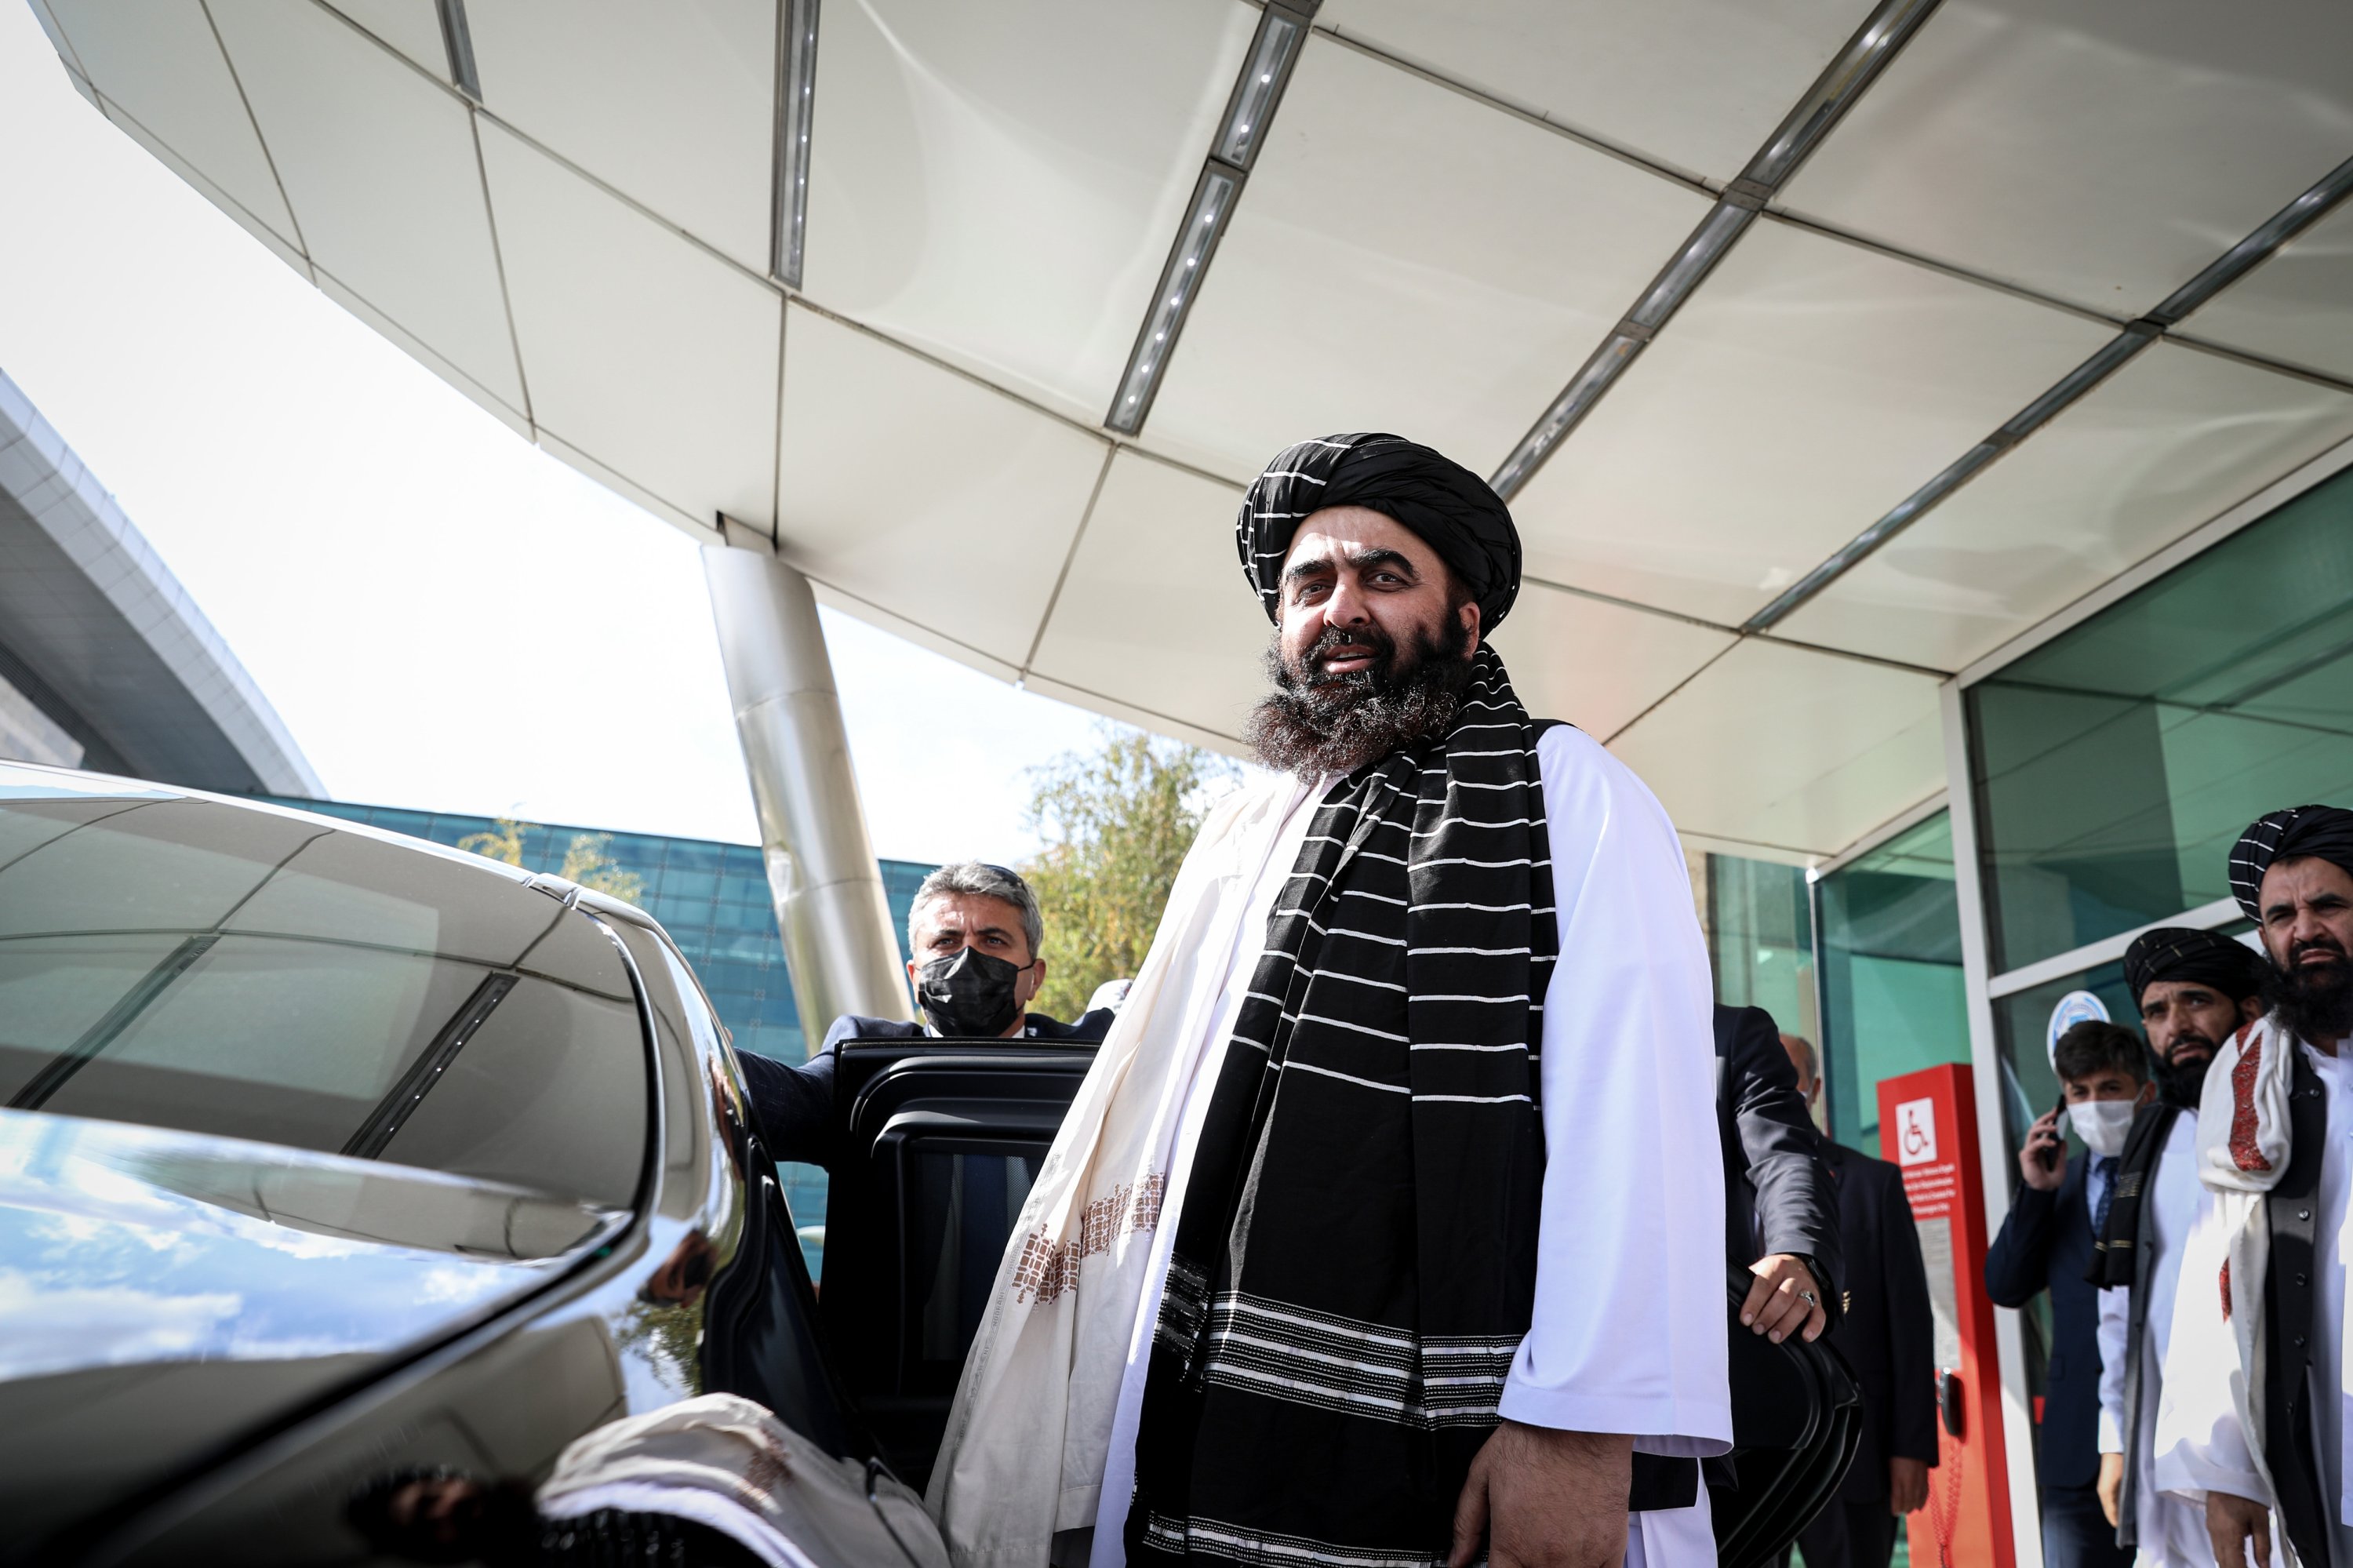 Accompanied by his delegation, the Taliban's Foreign Minister Amir Khan Muttaqi, arrives at Ankara Esenboğa Airport to meet Turkish officials, capital Ankara, Turkey, Oct. 14, 2021. (Photo by Getty Images)